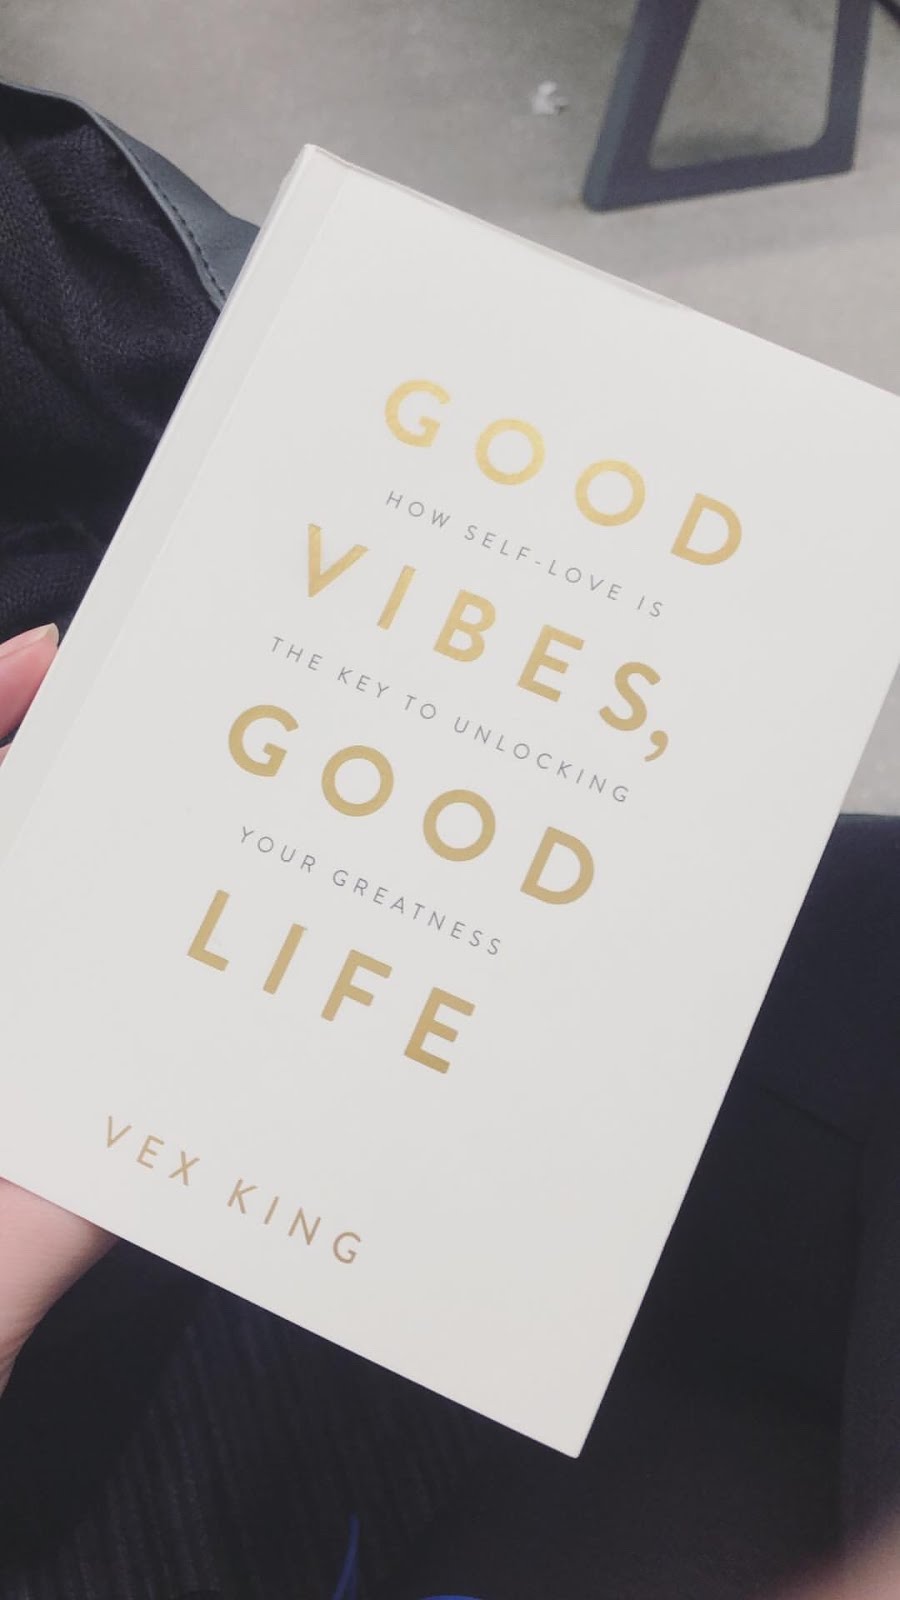 Good Vibes, Good Life by Vex King book review